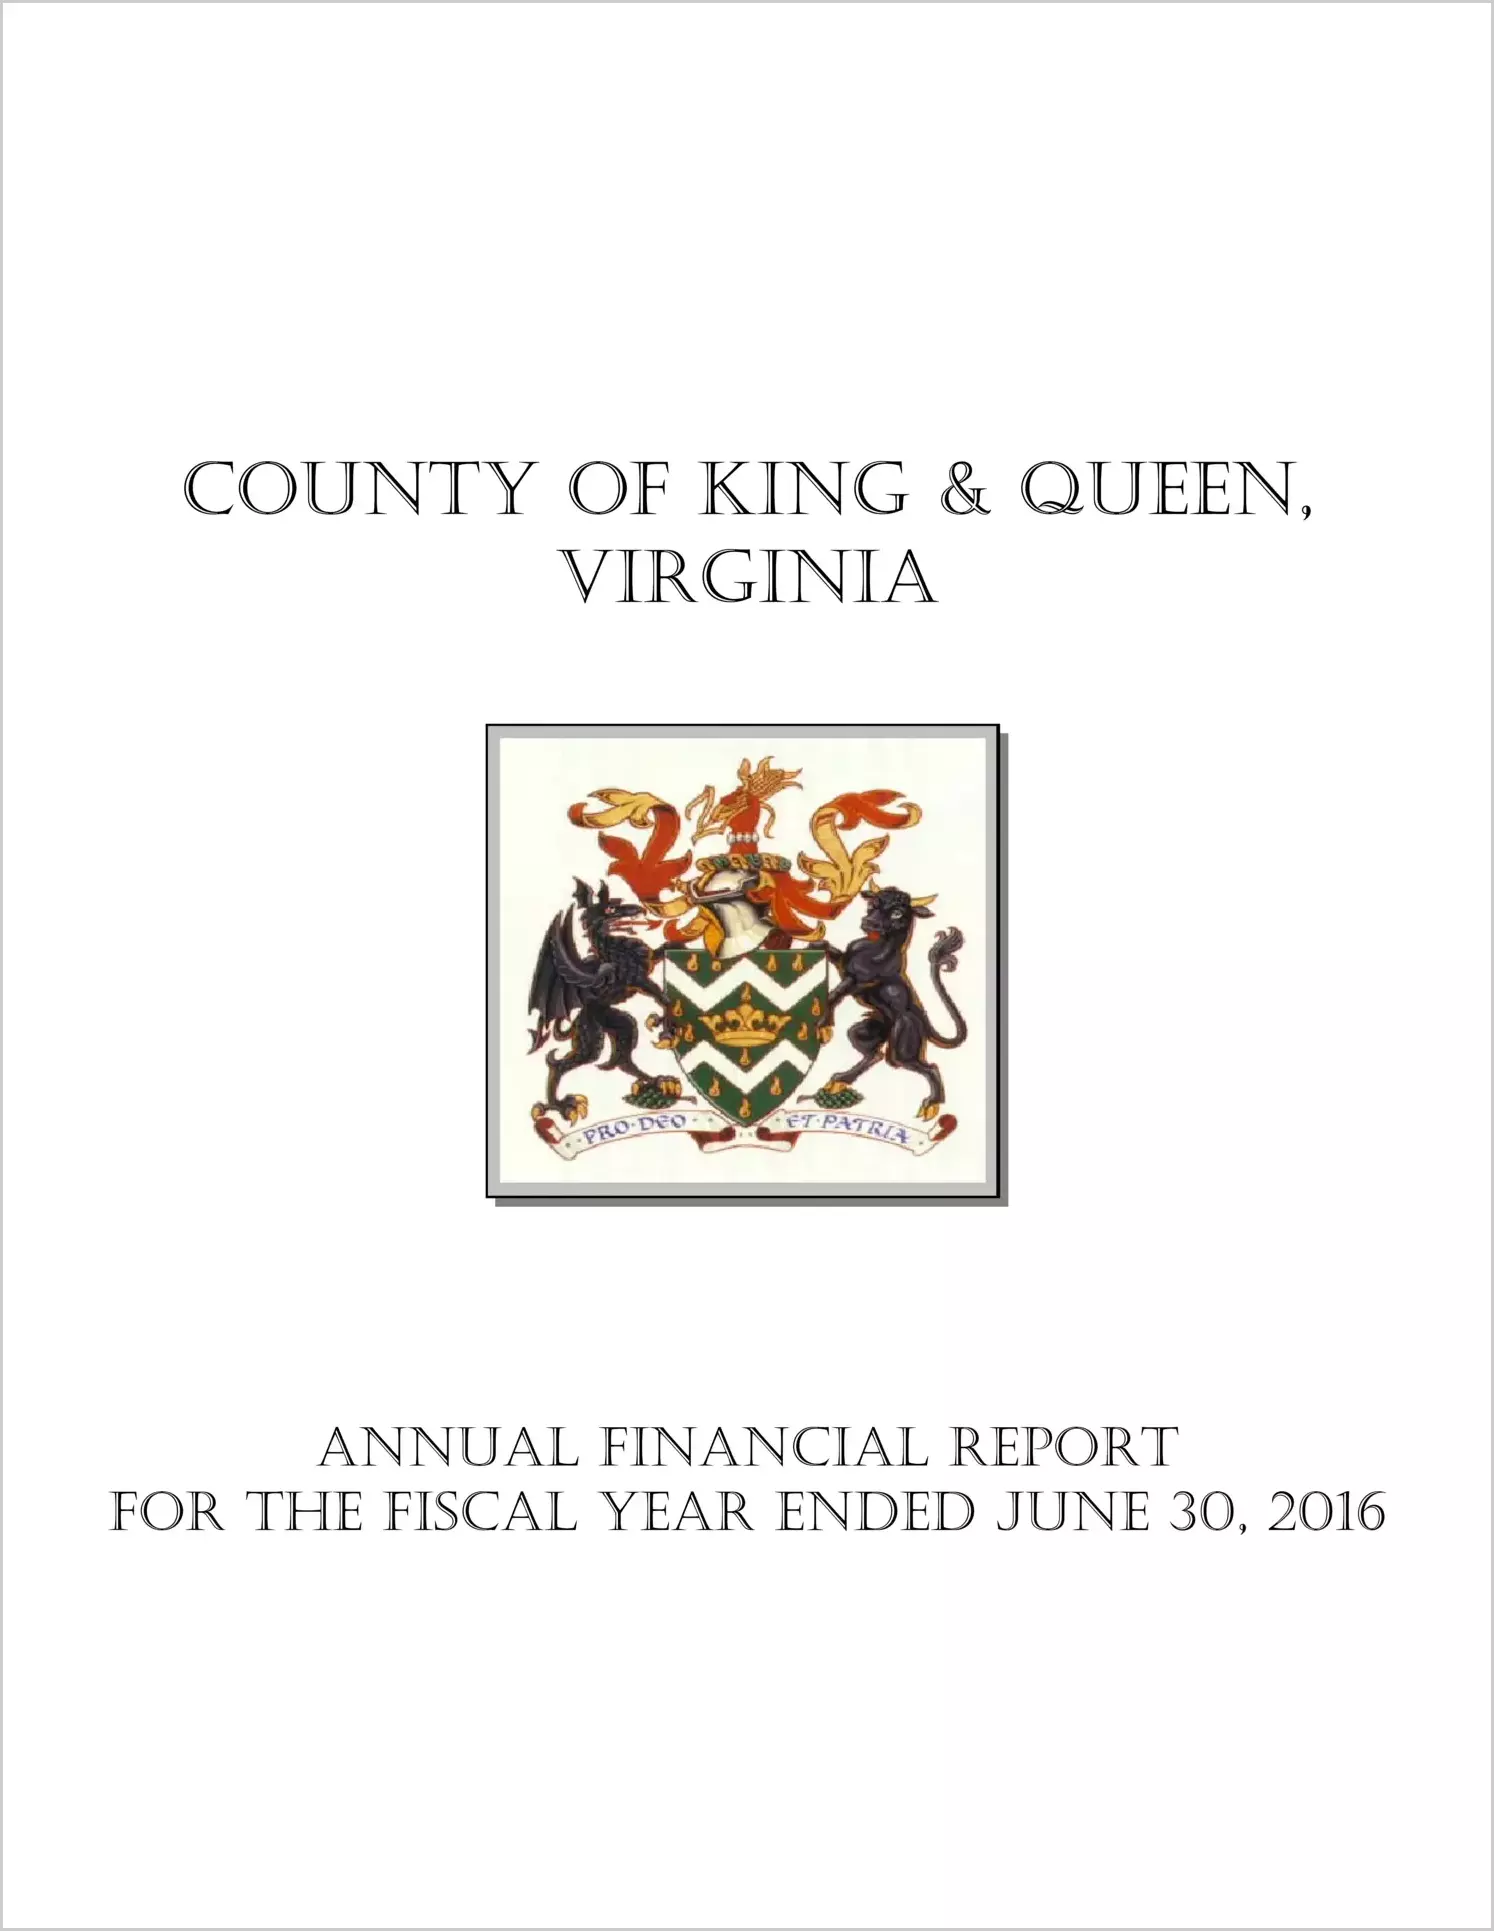 2016 Annual Financial Report for County of King and Queen